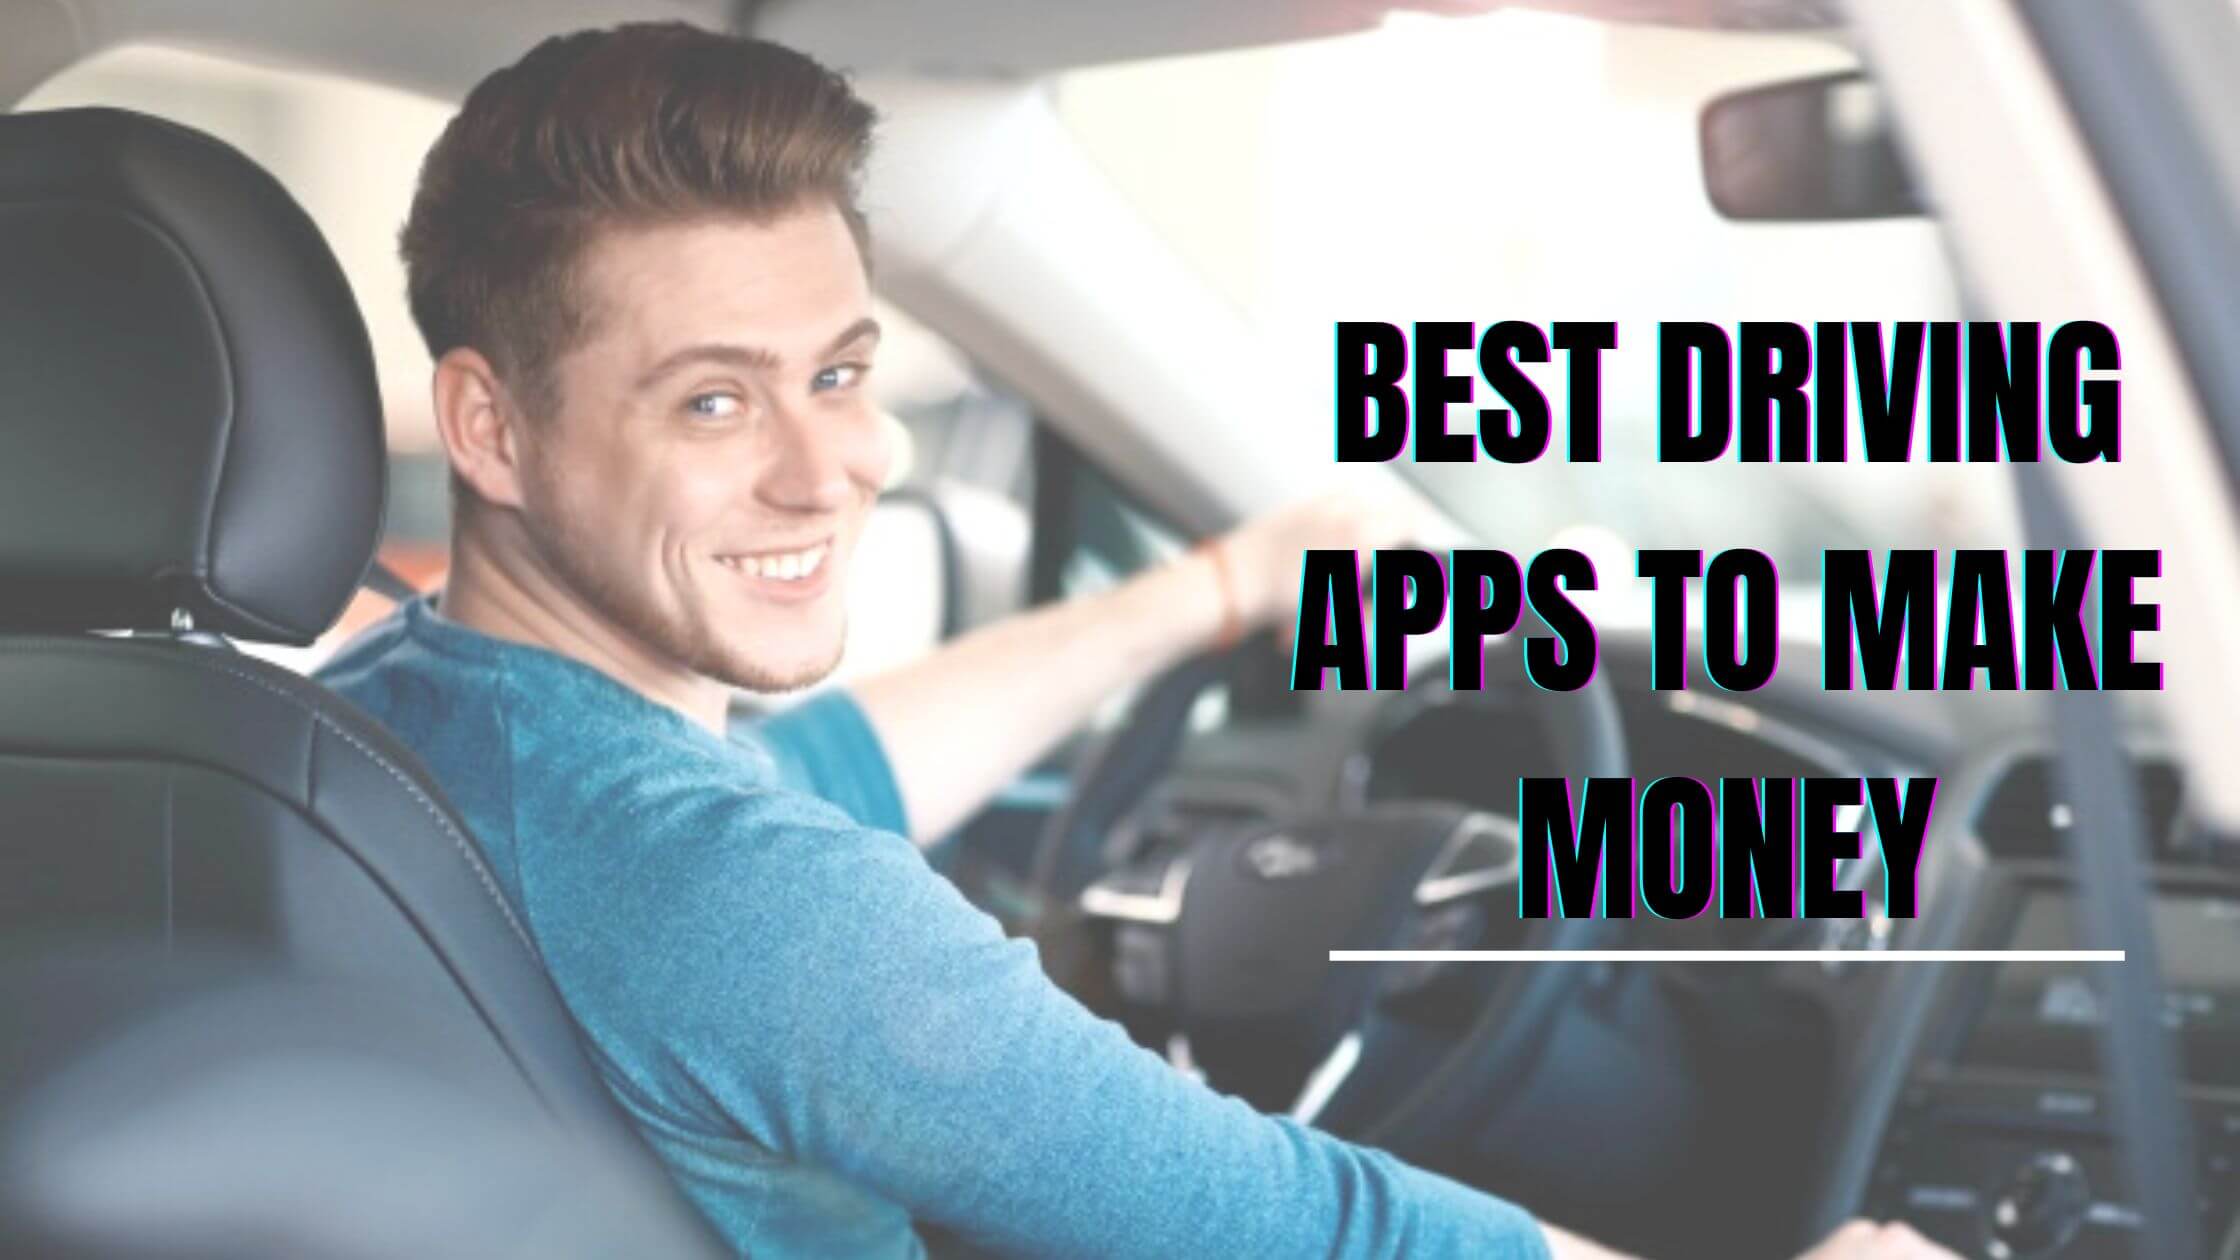 Best Driving Apps To Make Money